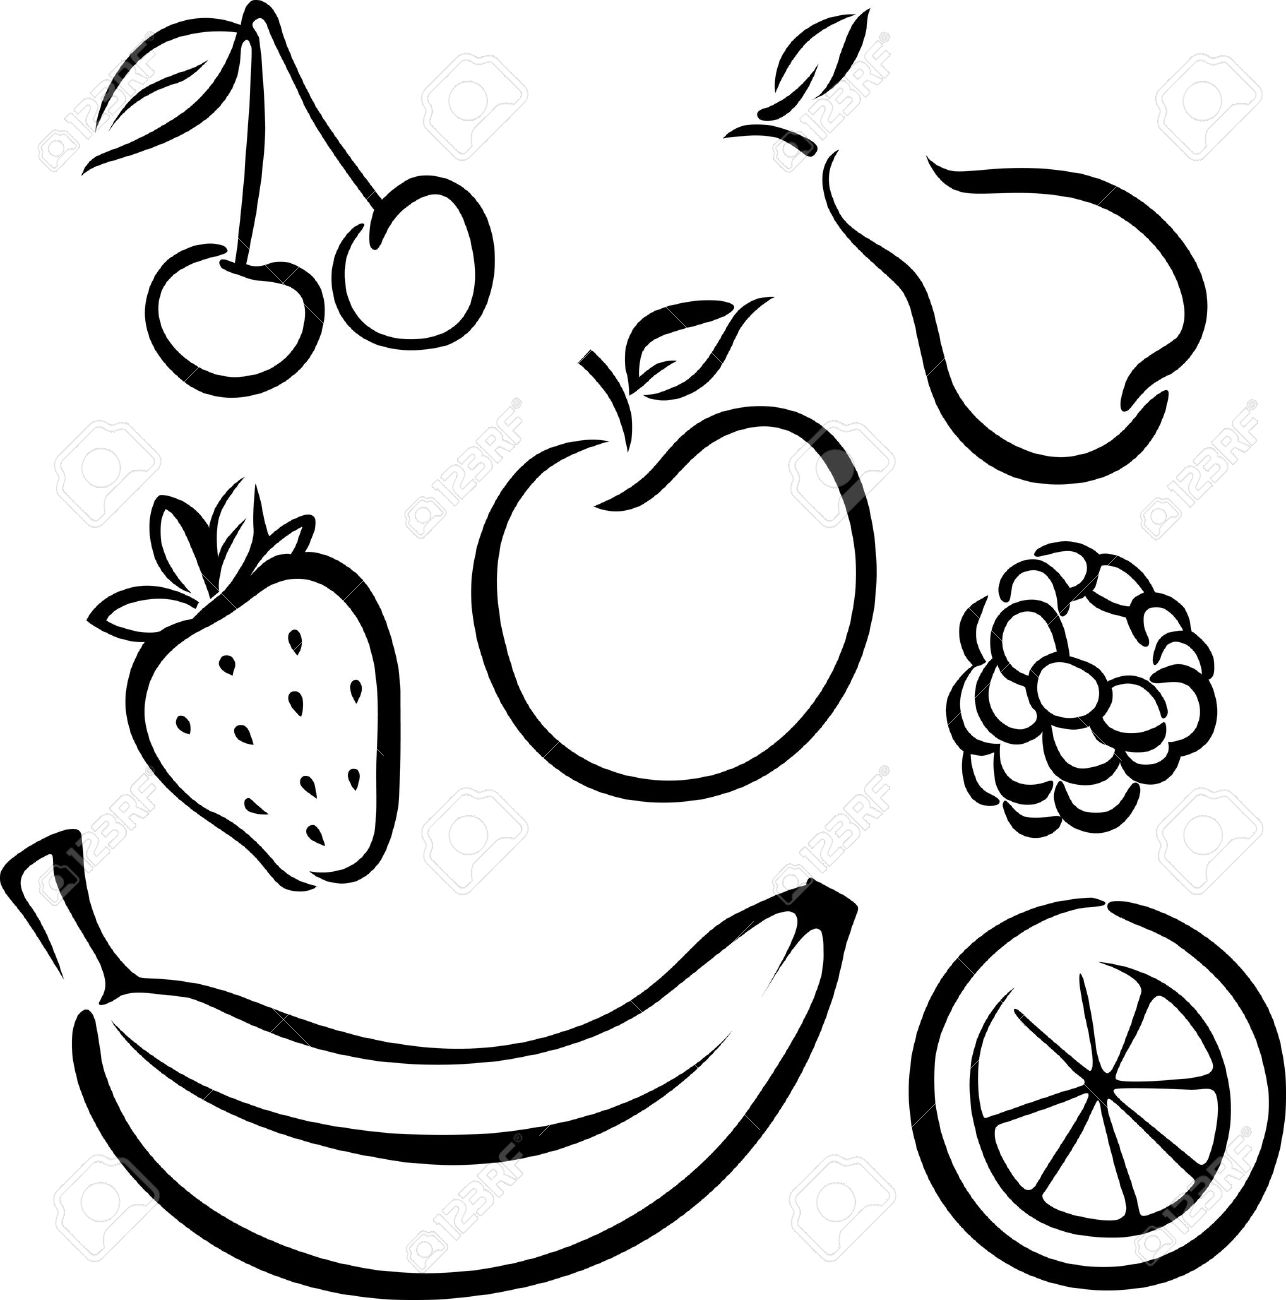 clipart of fruits black and white - photo #24